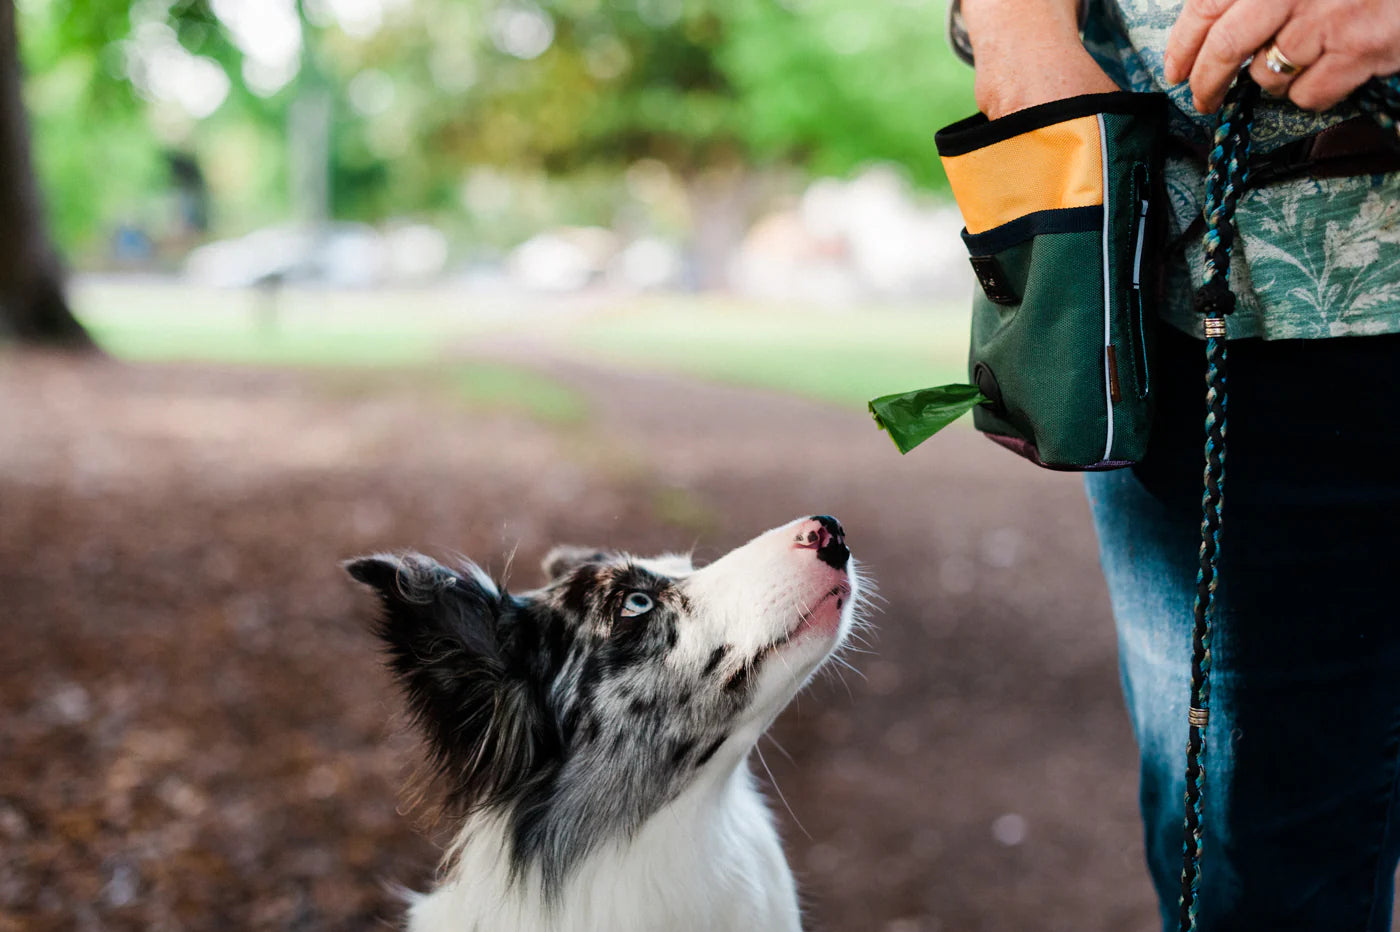 P.L.A.Y | Deluxe Training Pouch | Dog Training Supply